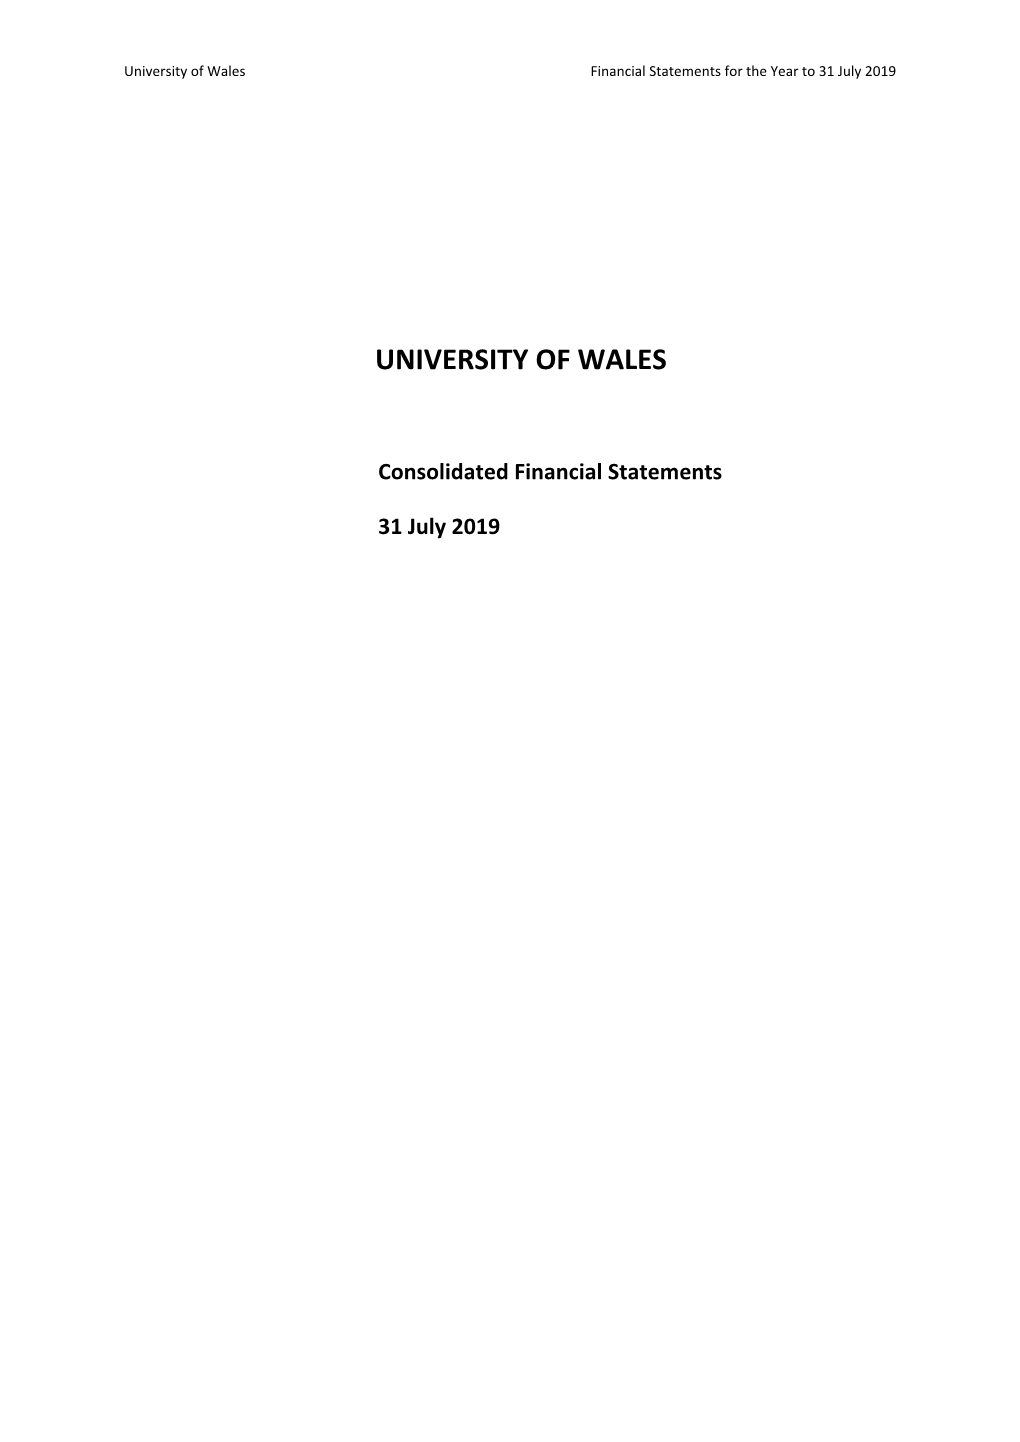 University of Wales Consolidated Statements 2019